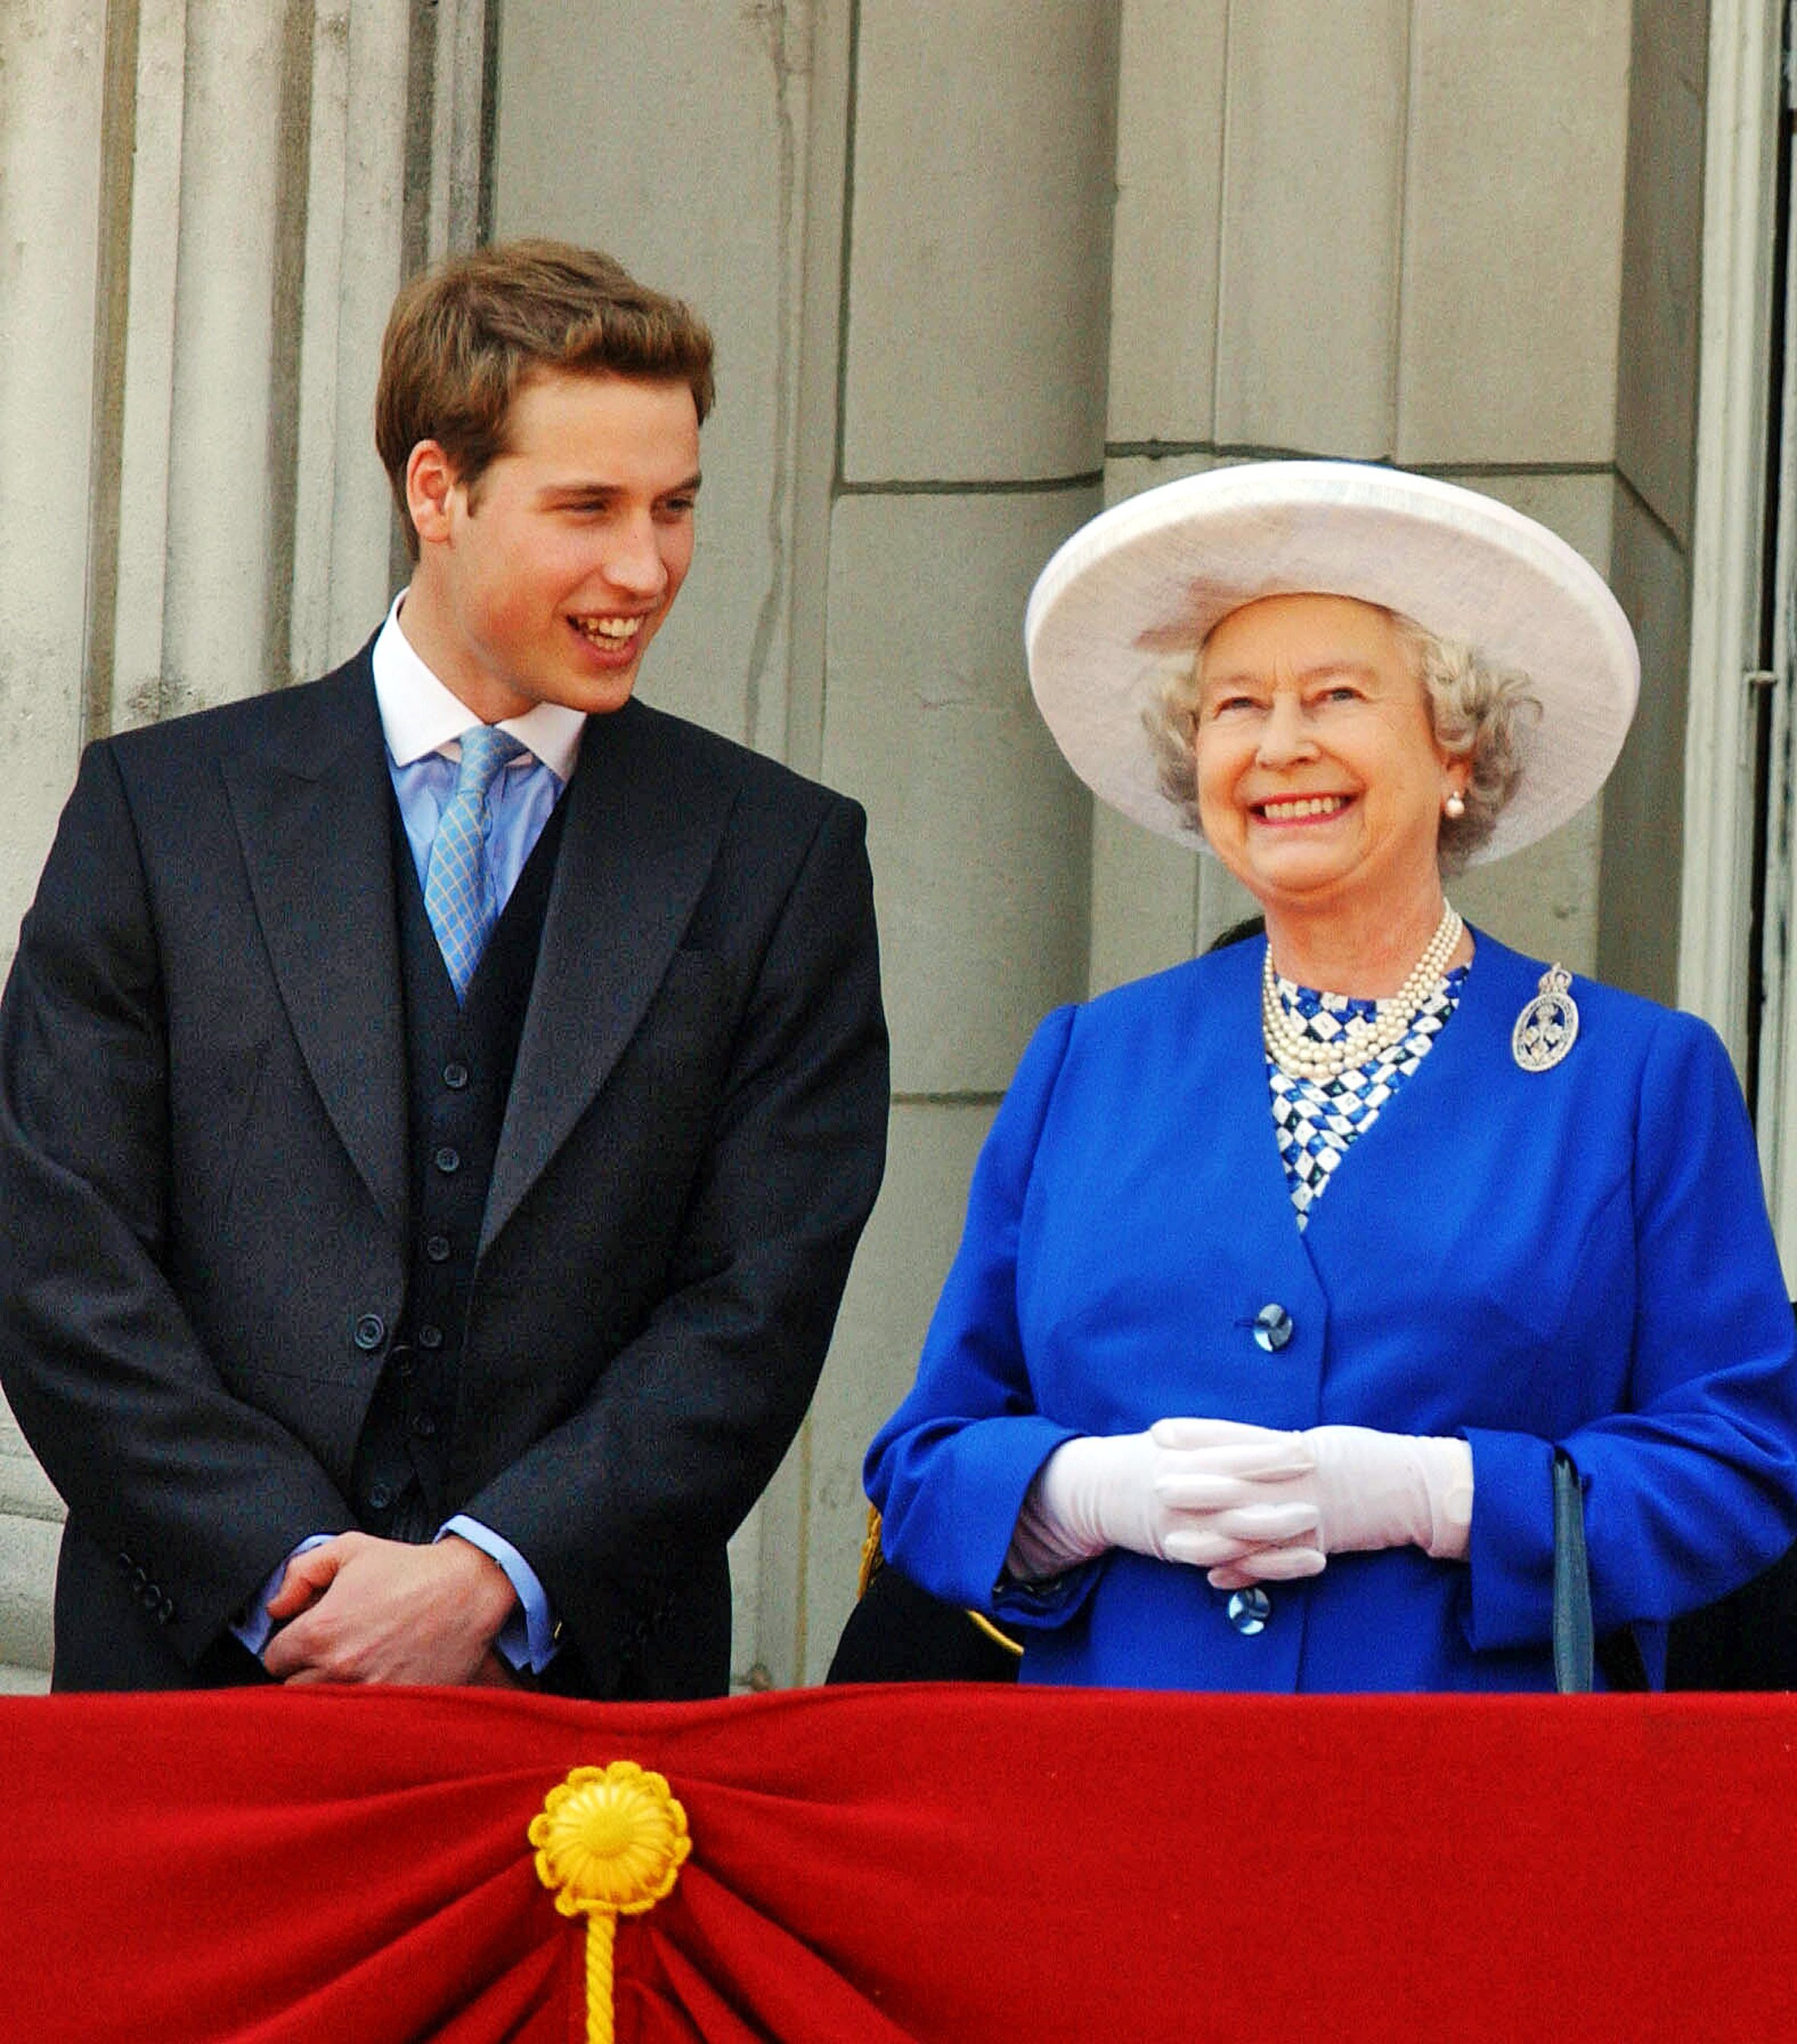 Queen Elizabeth ll pictured with her grandson Prince William watching Trooping of the Color on the balcony at Buckingham Palace on June 14, 2003, London, England ┃Source: Getty Images